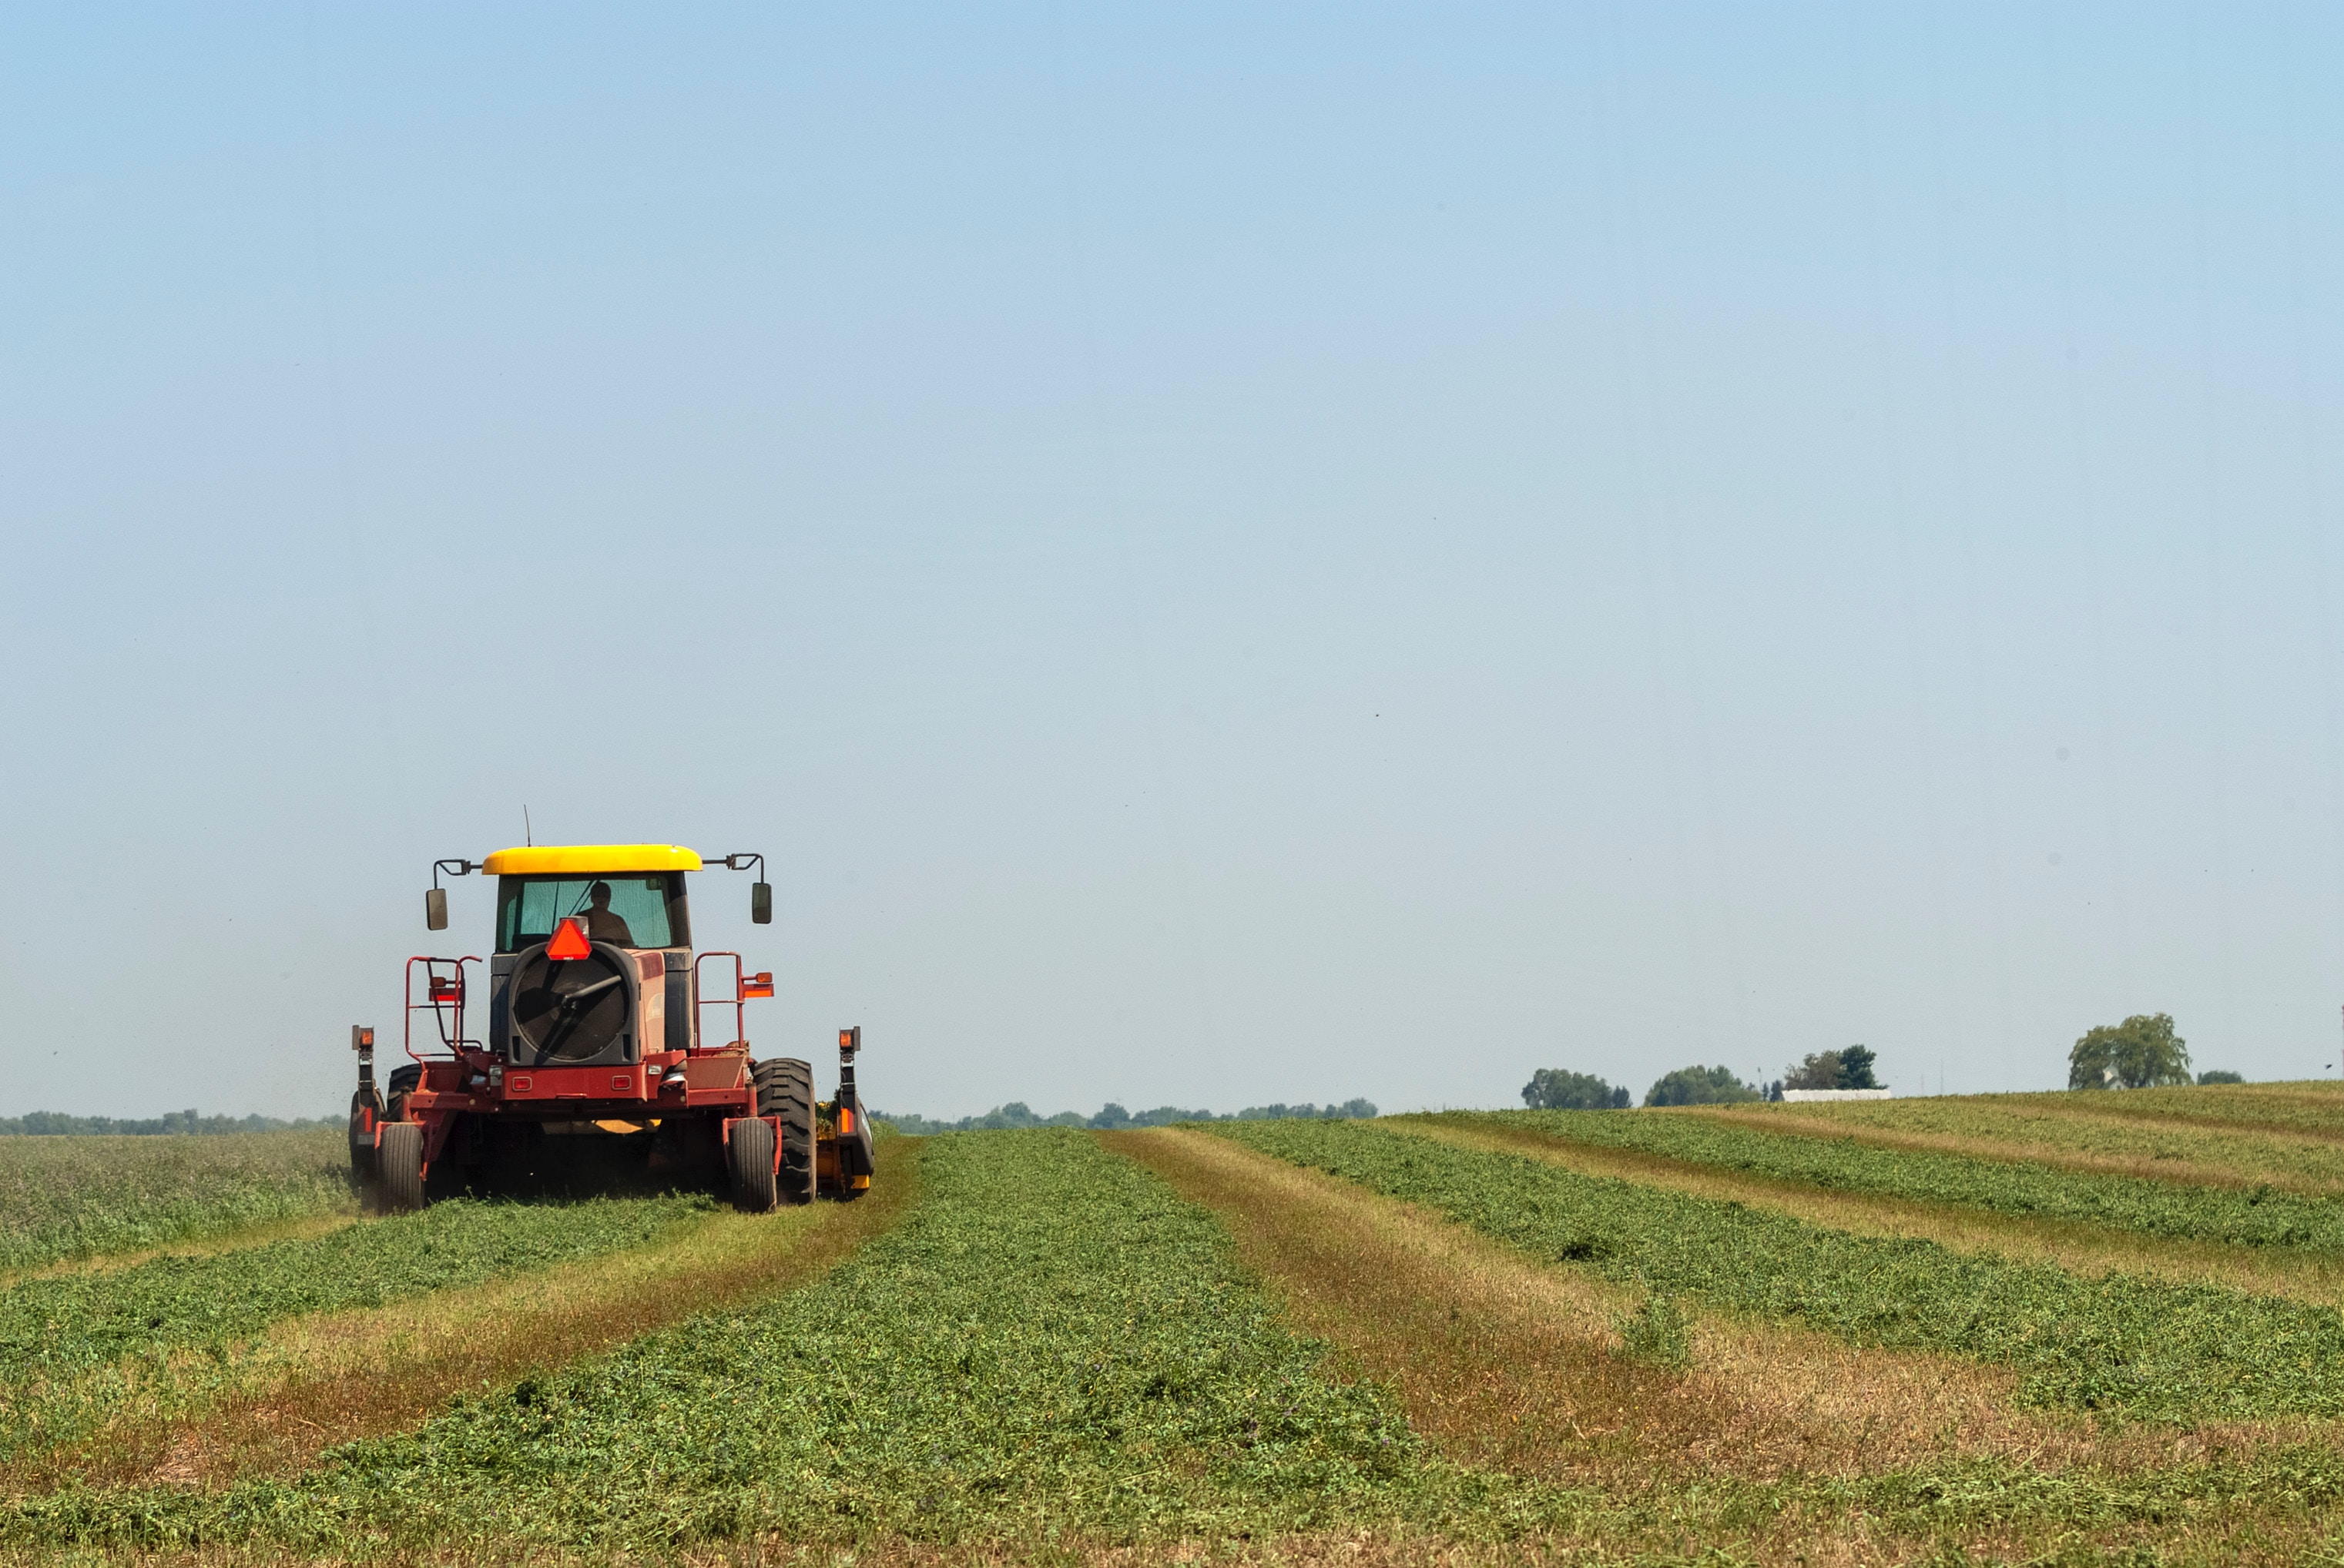 image showing a tractor in a field